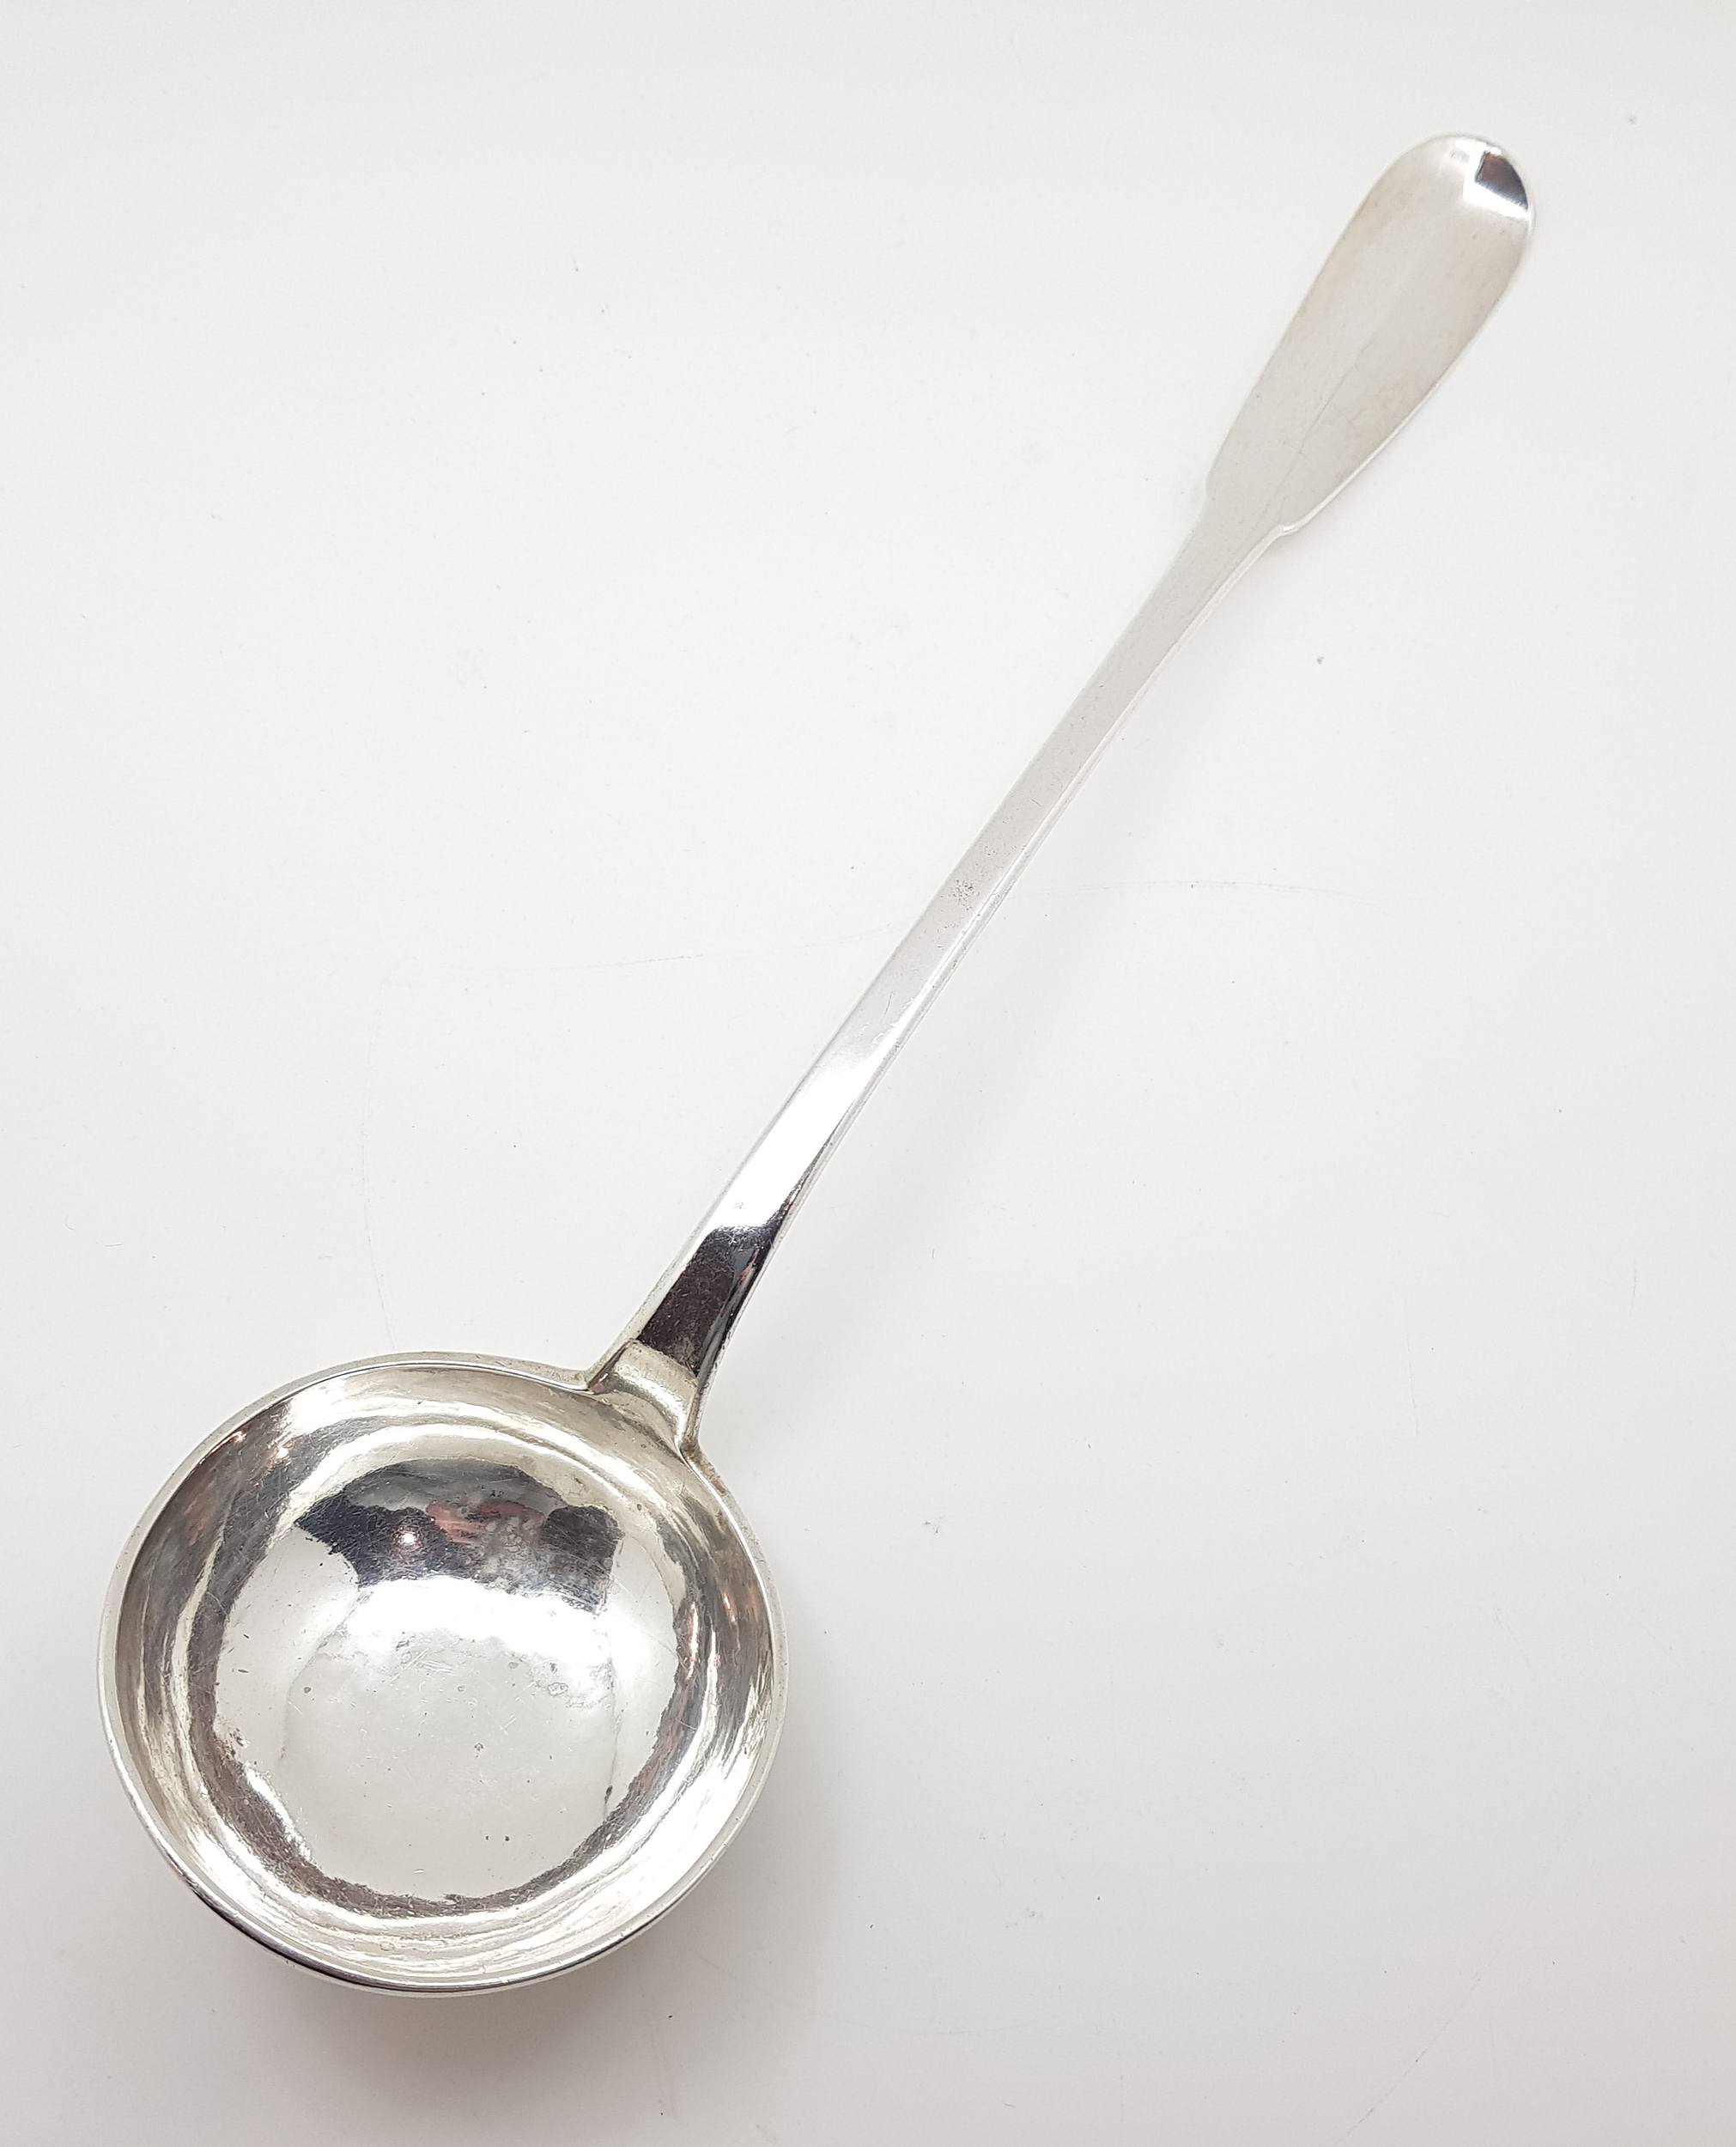 'Louis XVII French Sterling Silver Ladle, Paris Duty marks for 950 Silver, Circa 1798'